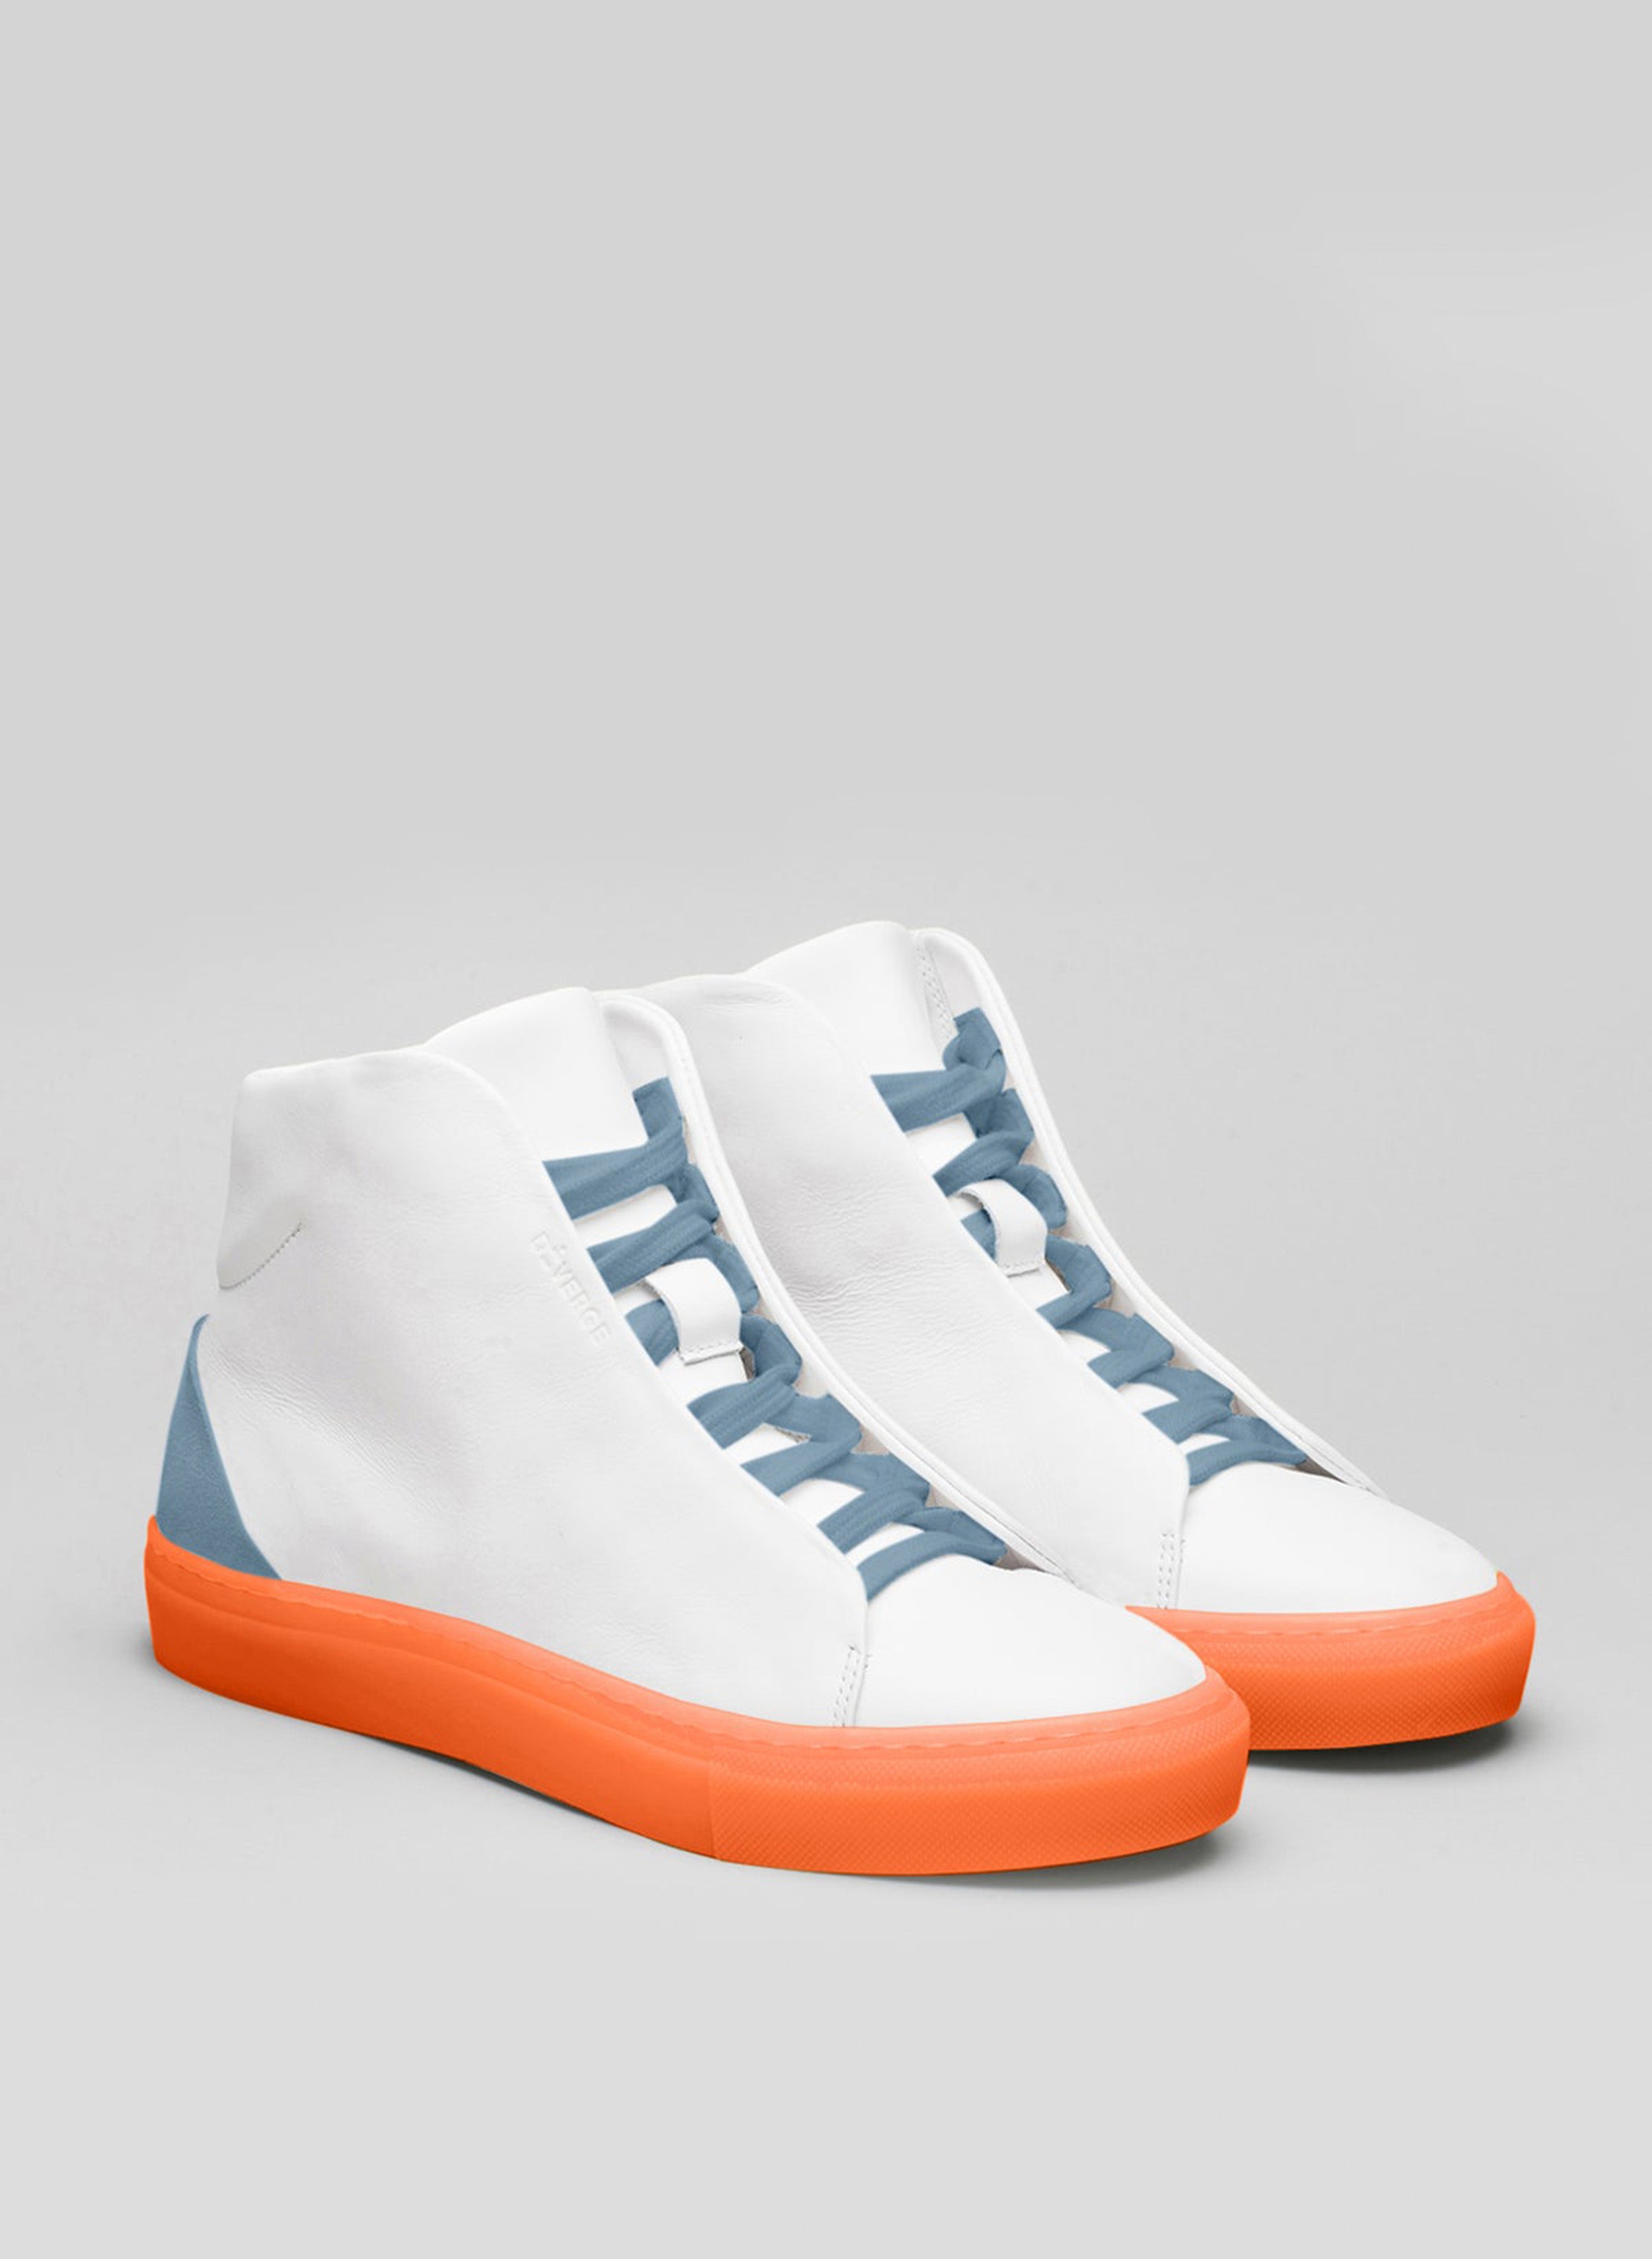 A pair of white high top sneakers with blue laces and orange sole, showcasing custom shoes by Diverge.